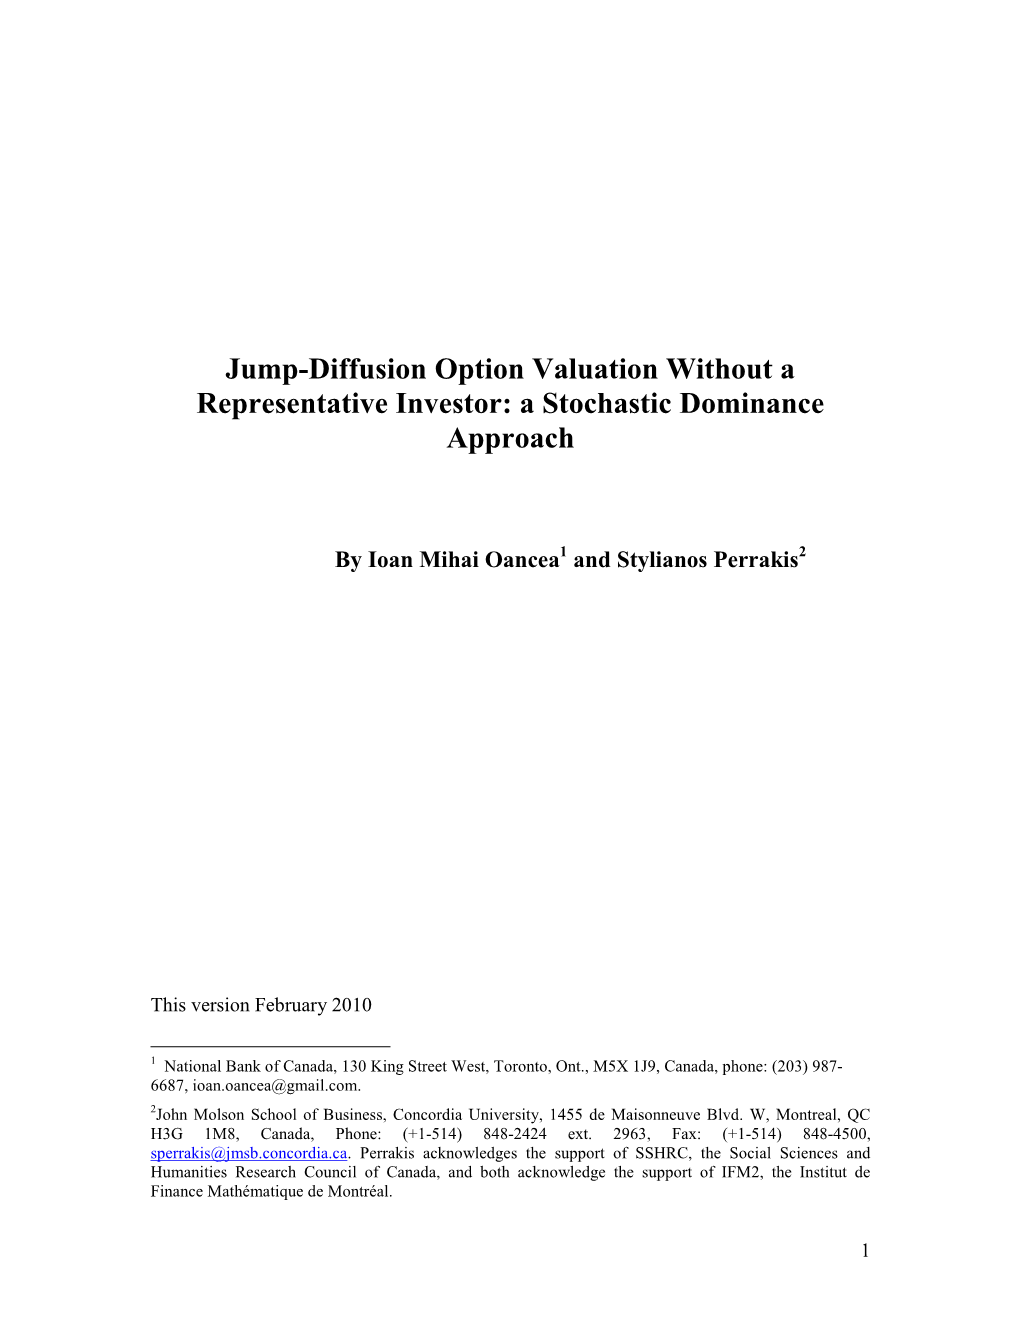 Jump-Diffusion Option Valuation Without a Representative Investor: a Stochastic Dominance Approach